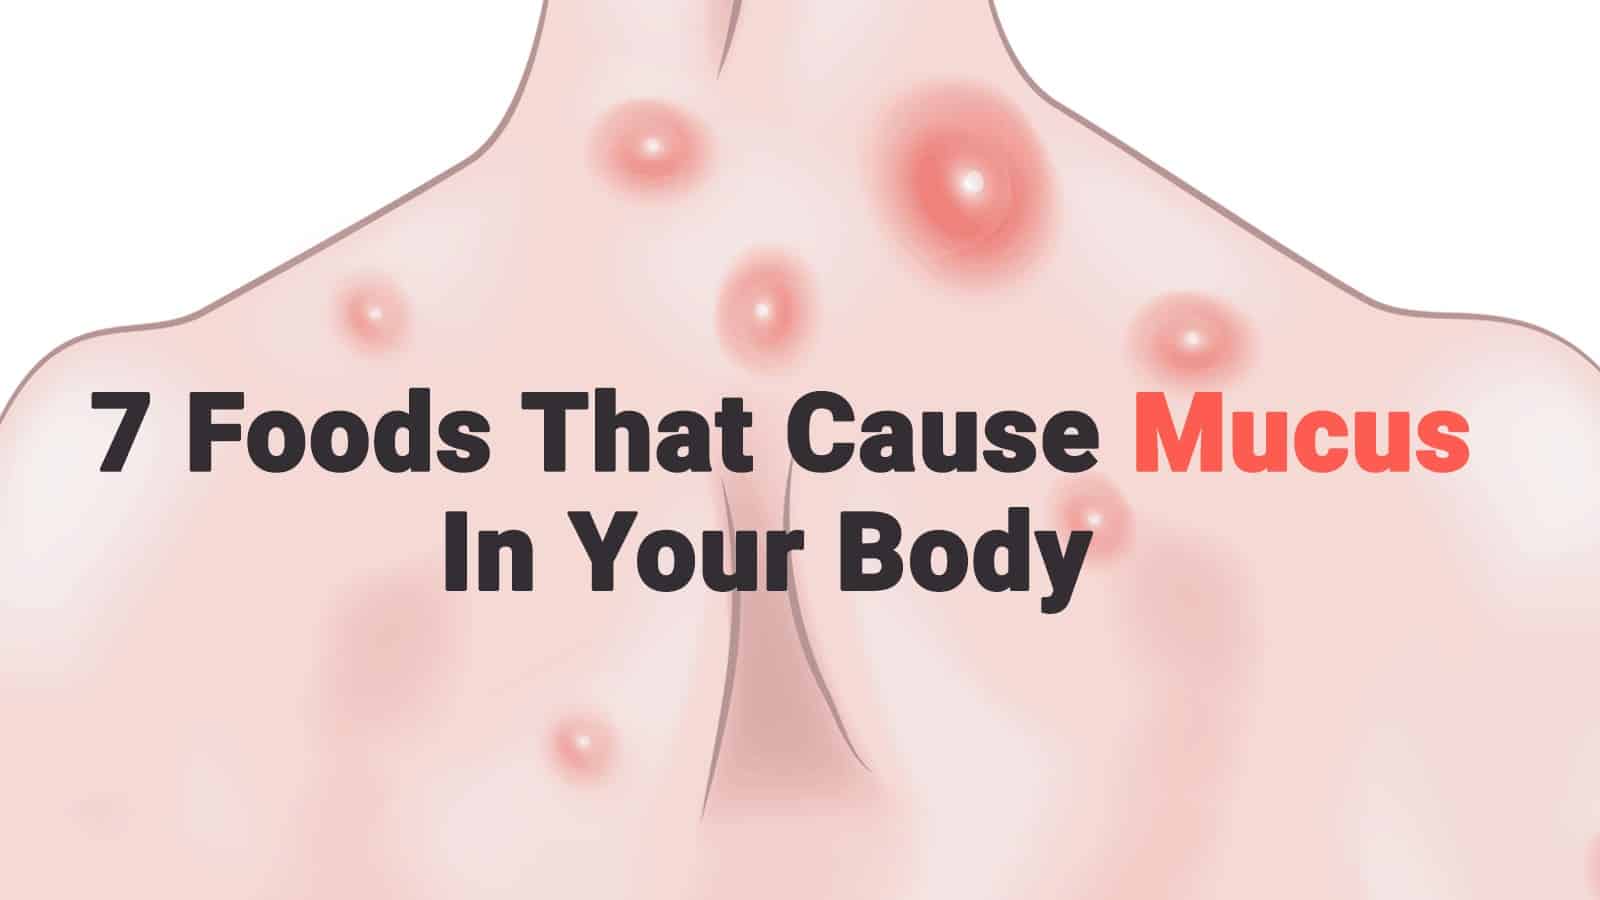 7 Foods That Cause Mucus In Your Body